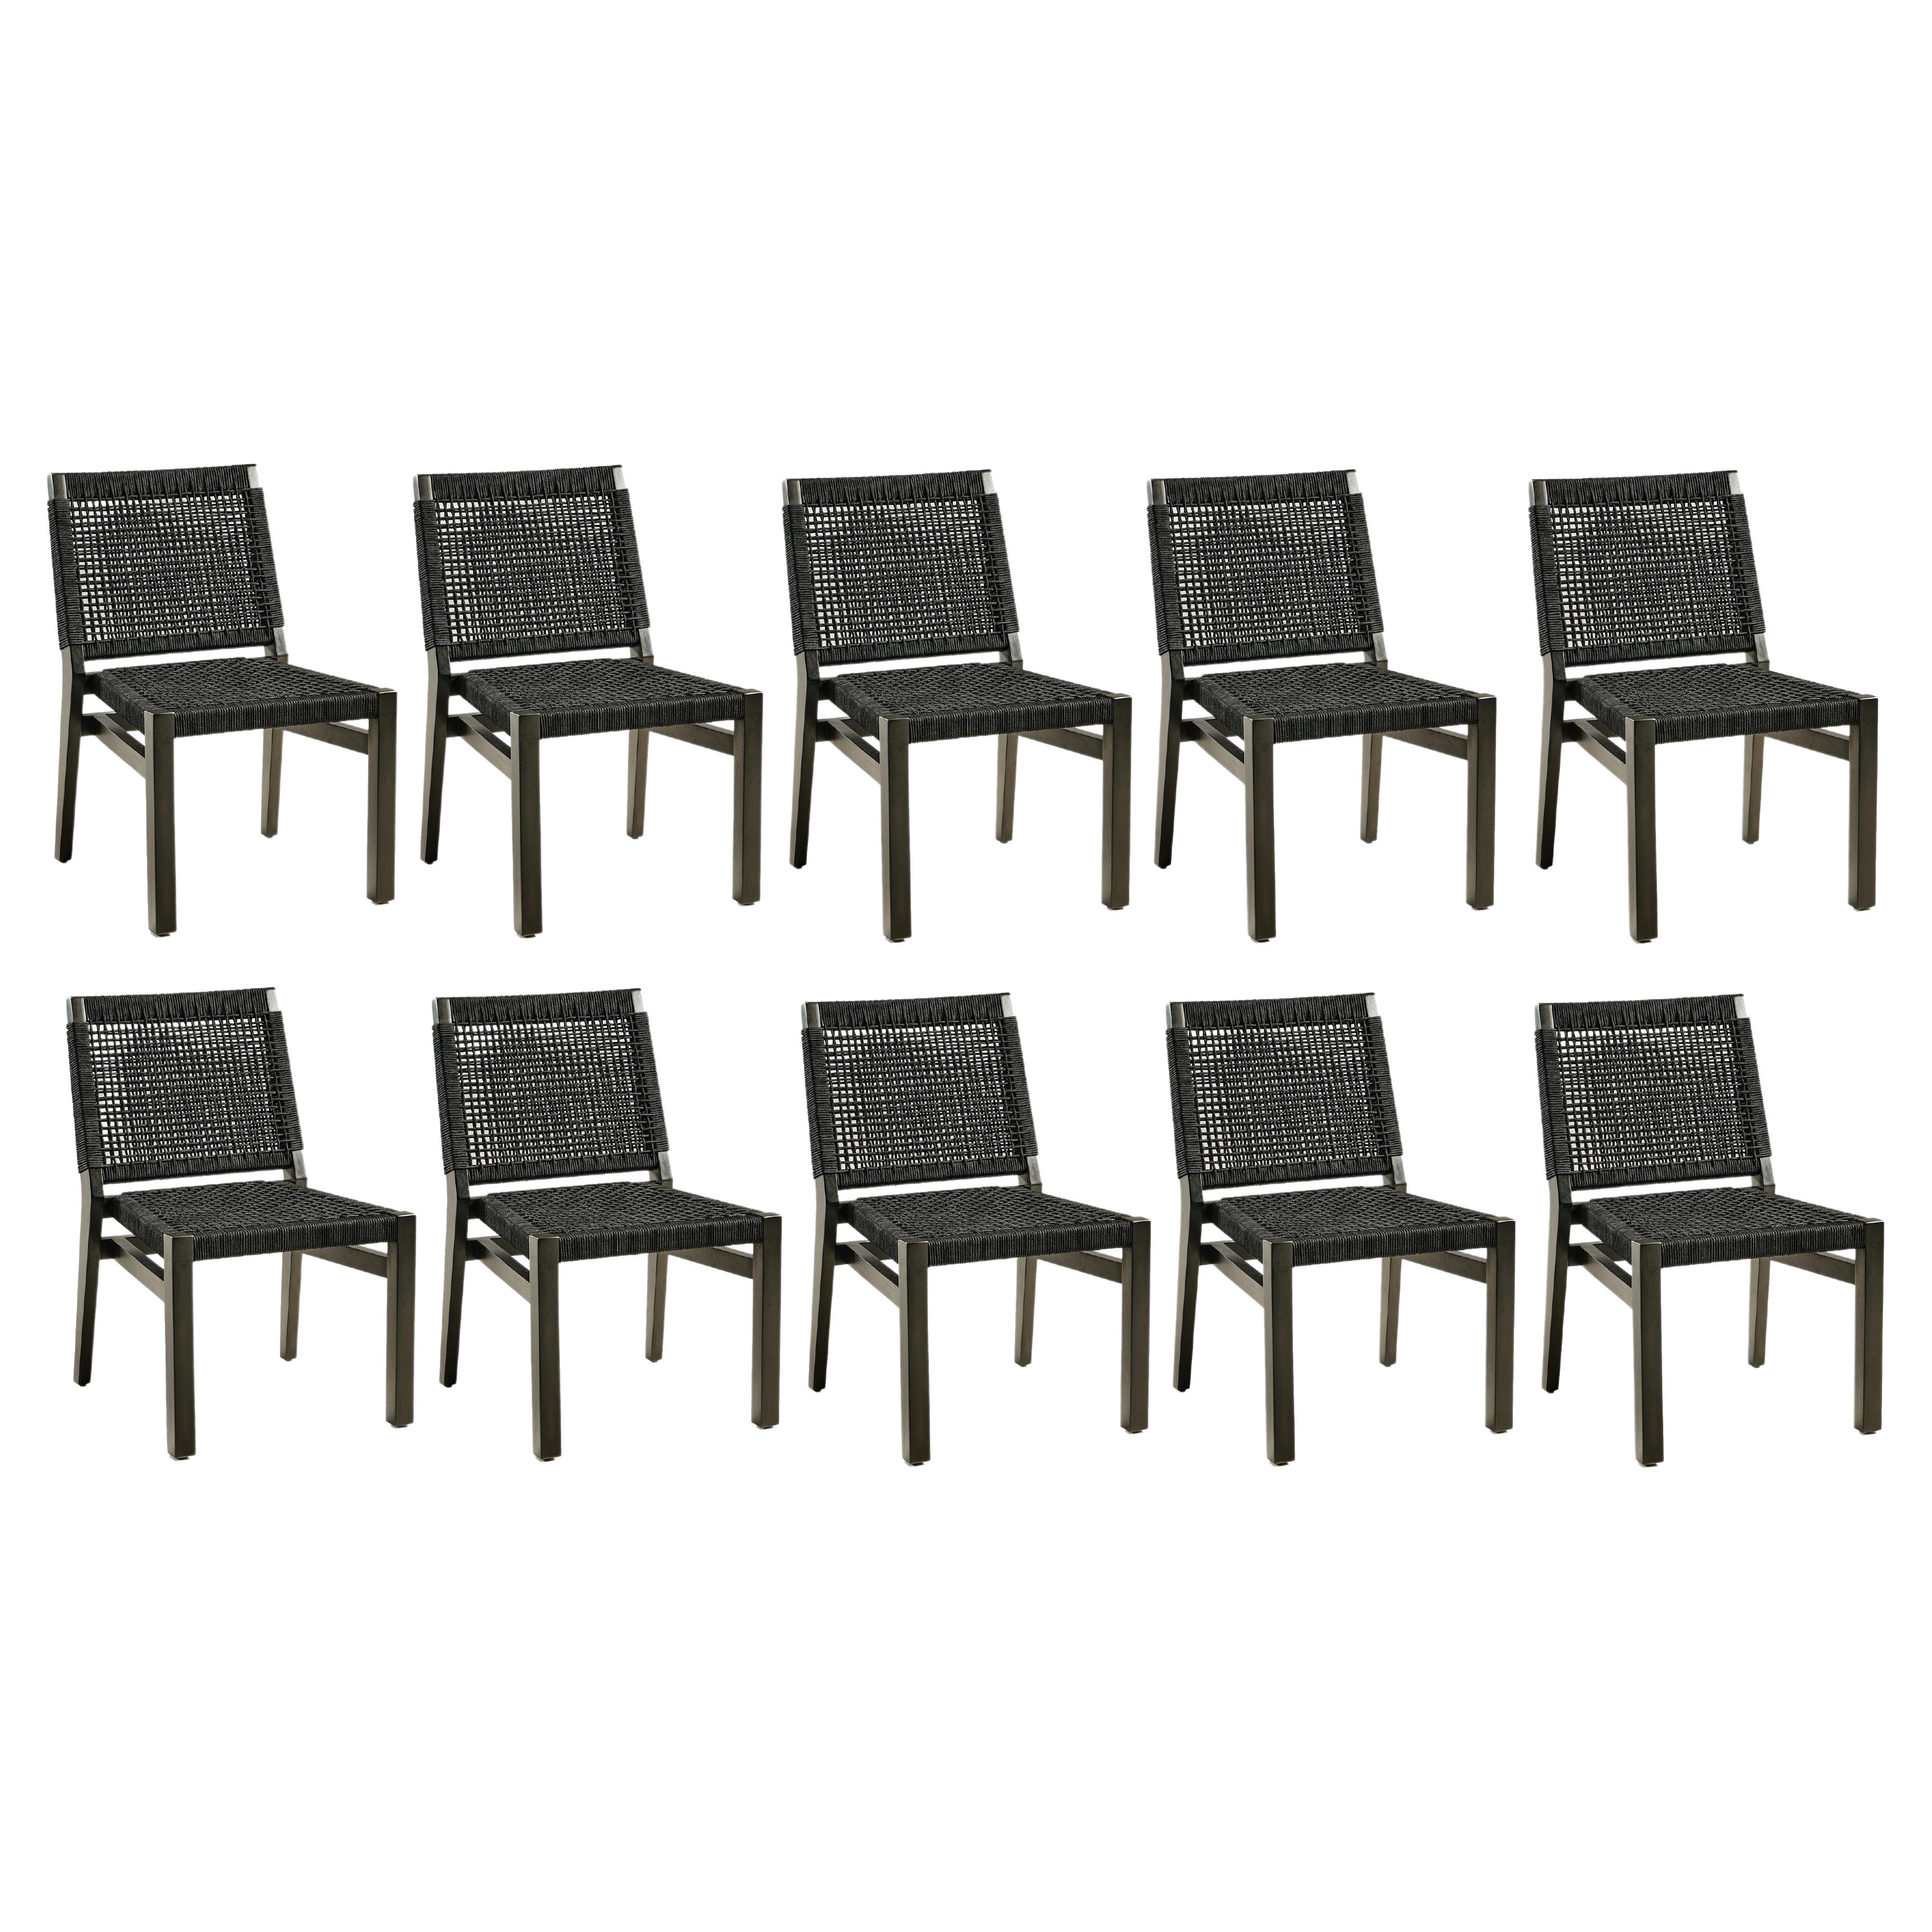 Modern 10 Stackable Outdoor Dining Chairs, Wood / Rope For Sale